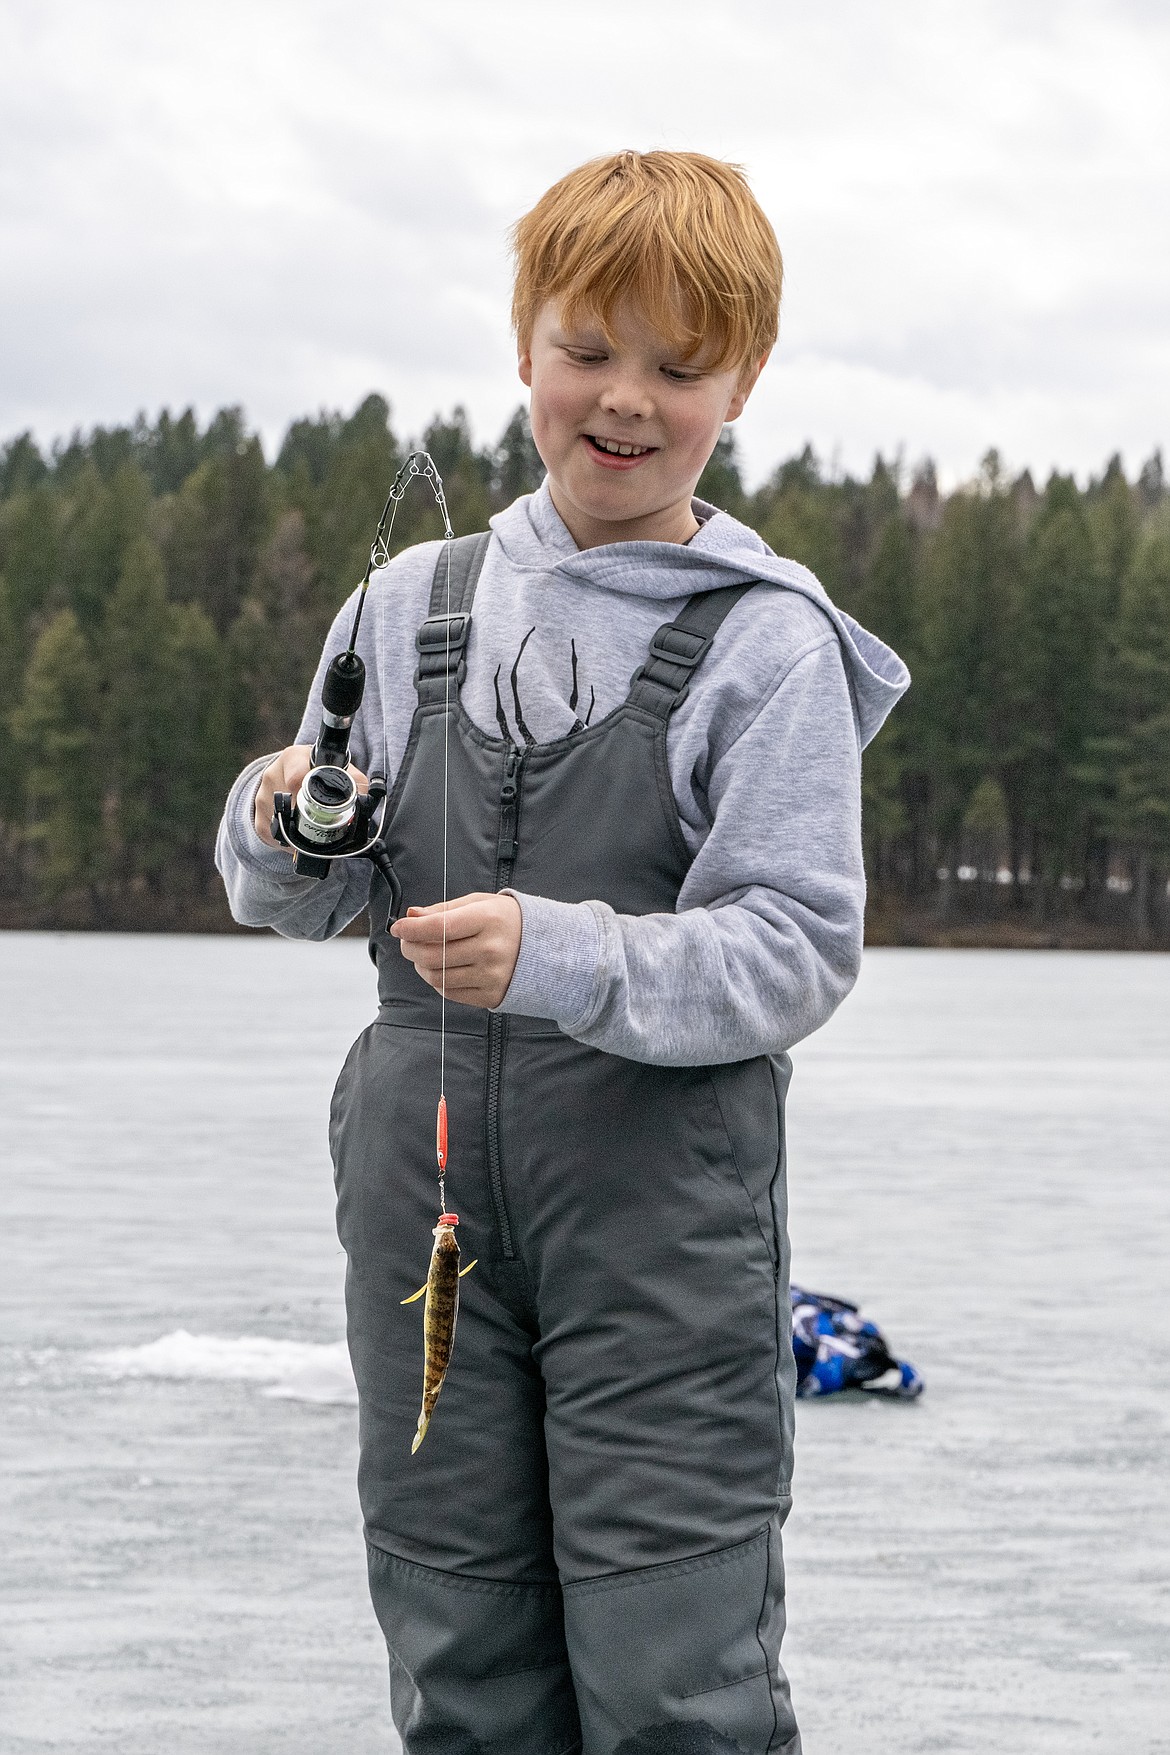 GGES fourth grader Kason Hall catches his first fish on Murphy Lake with FWP’s Hooked on Fishing program Thursday, Feb. 22. (Avery Howe)